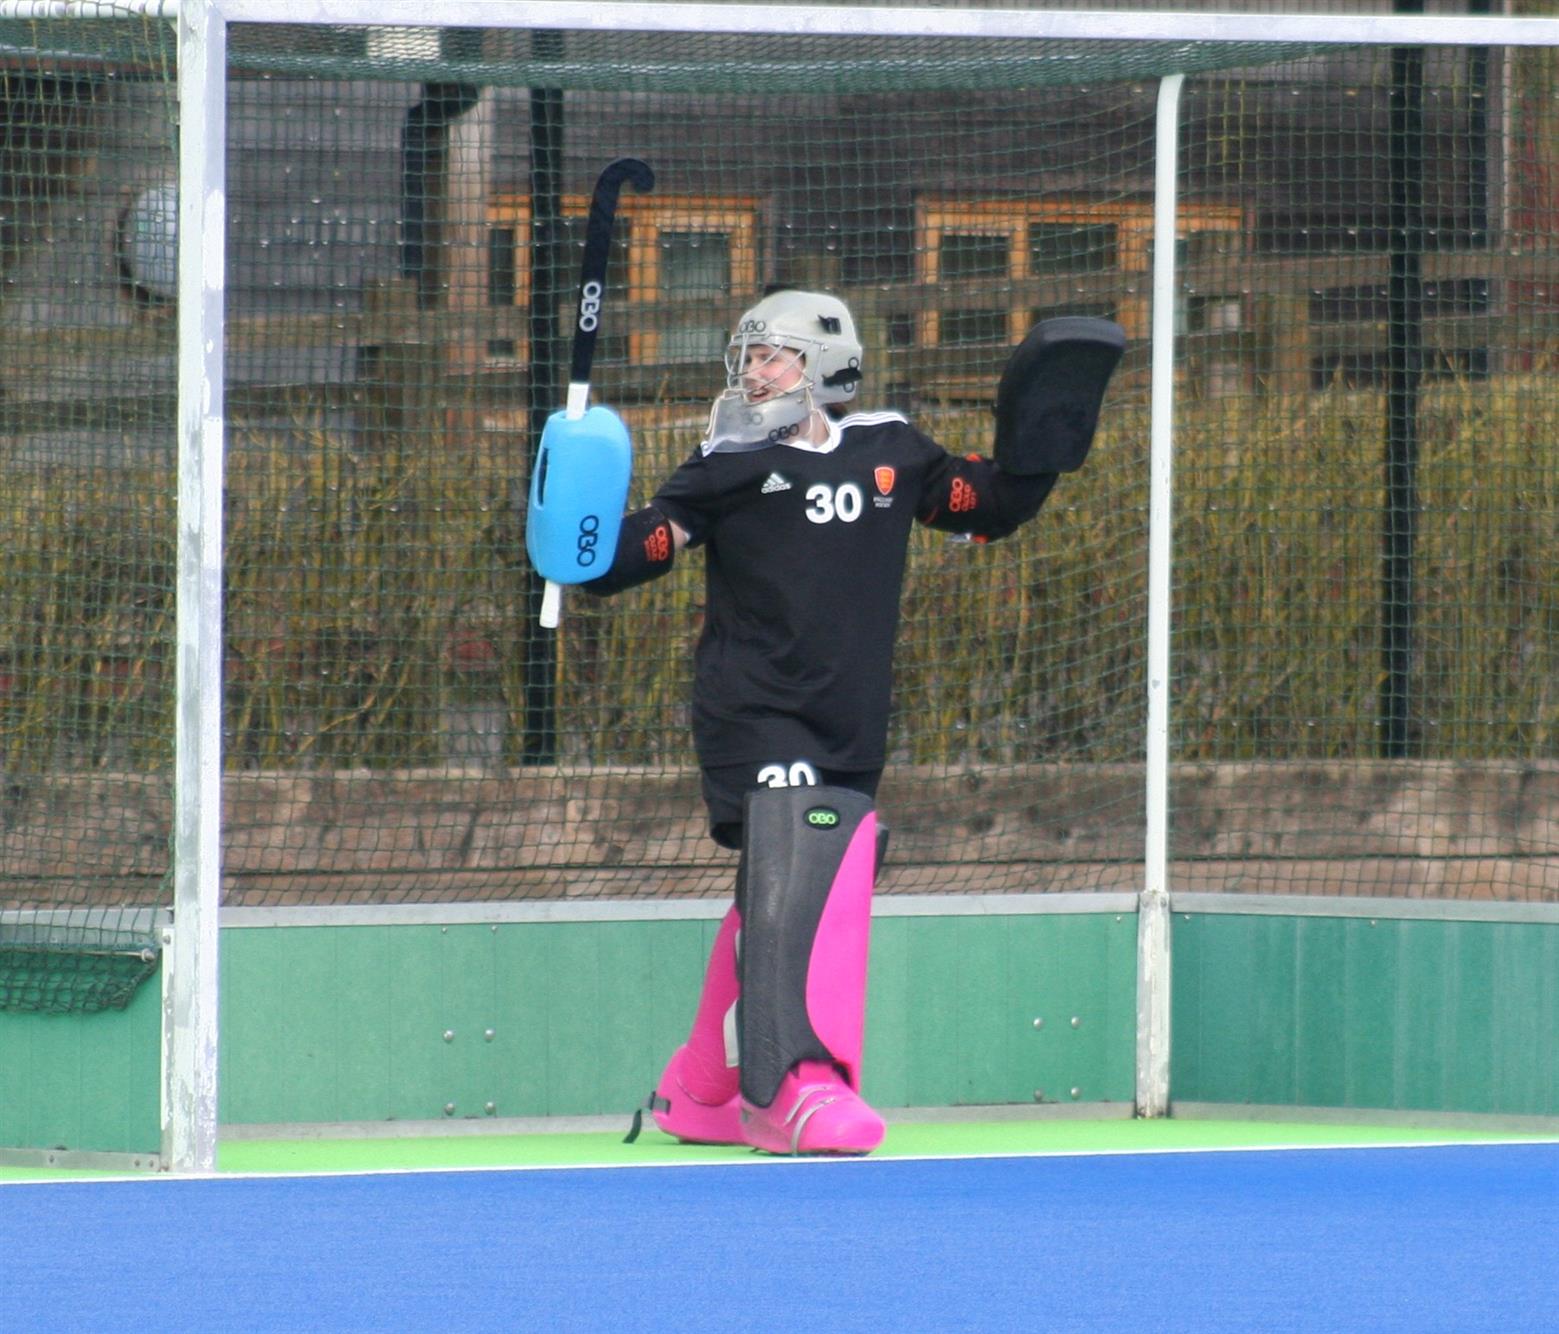 Anya heads off to Holland for 5 Nations International Hockey Tournament